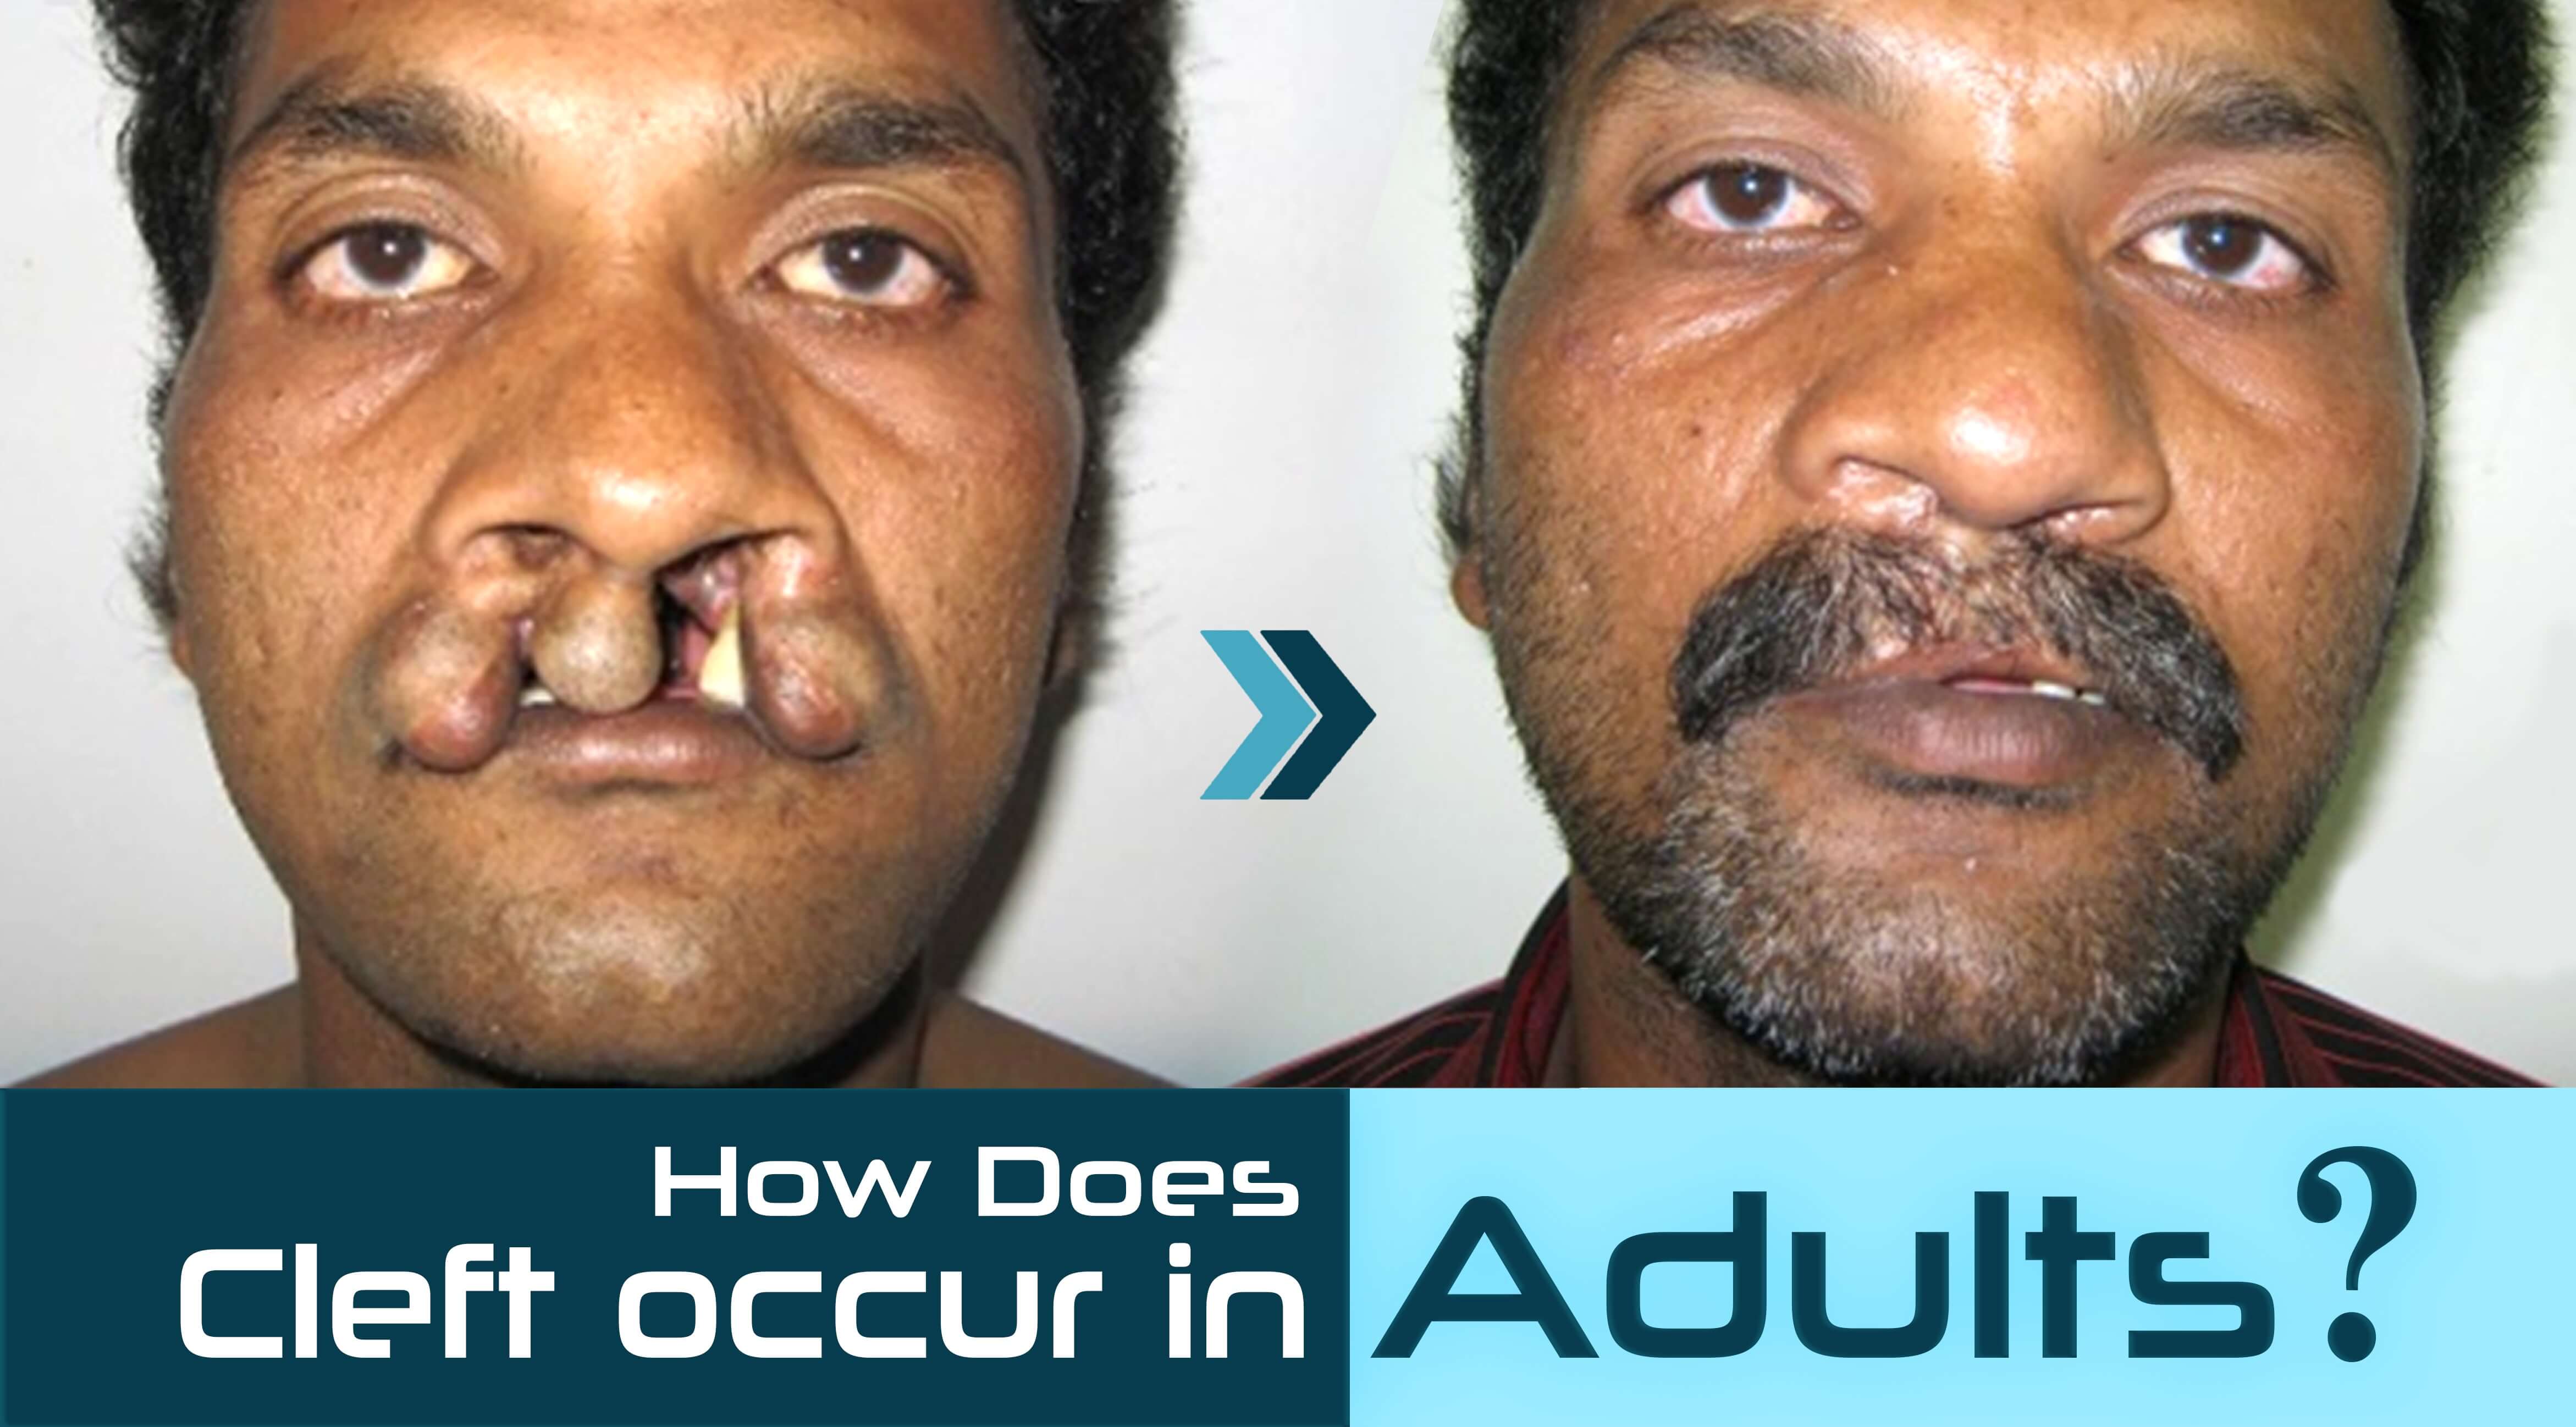 Cleft occur in adults